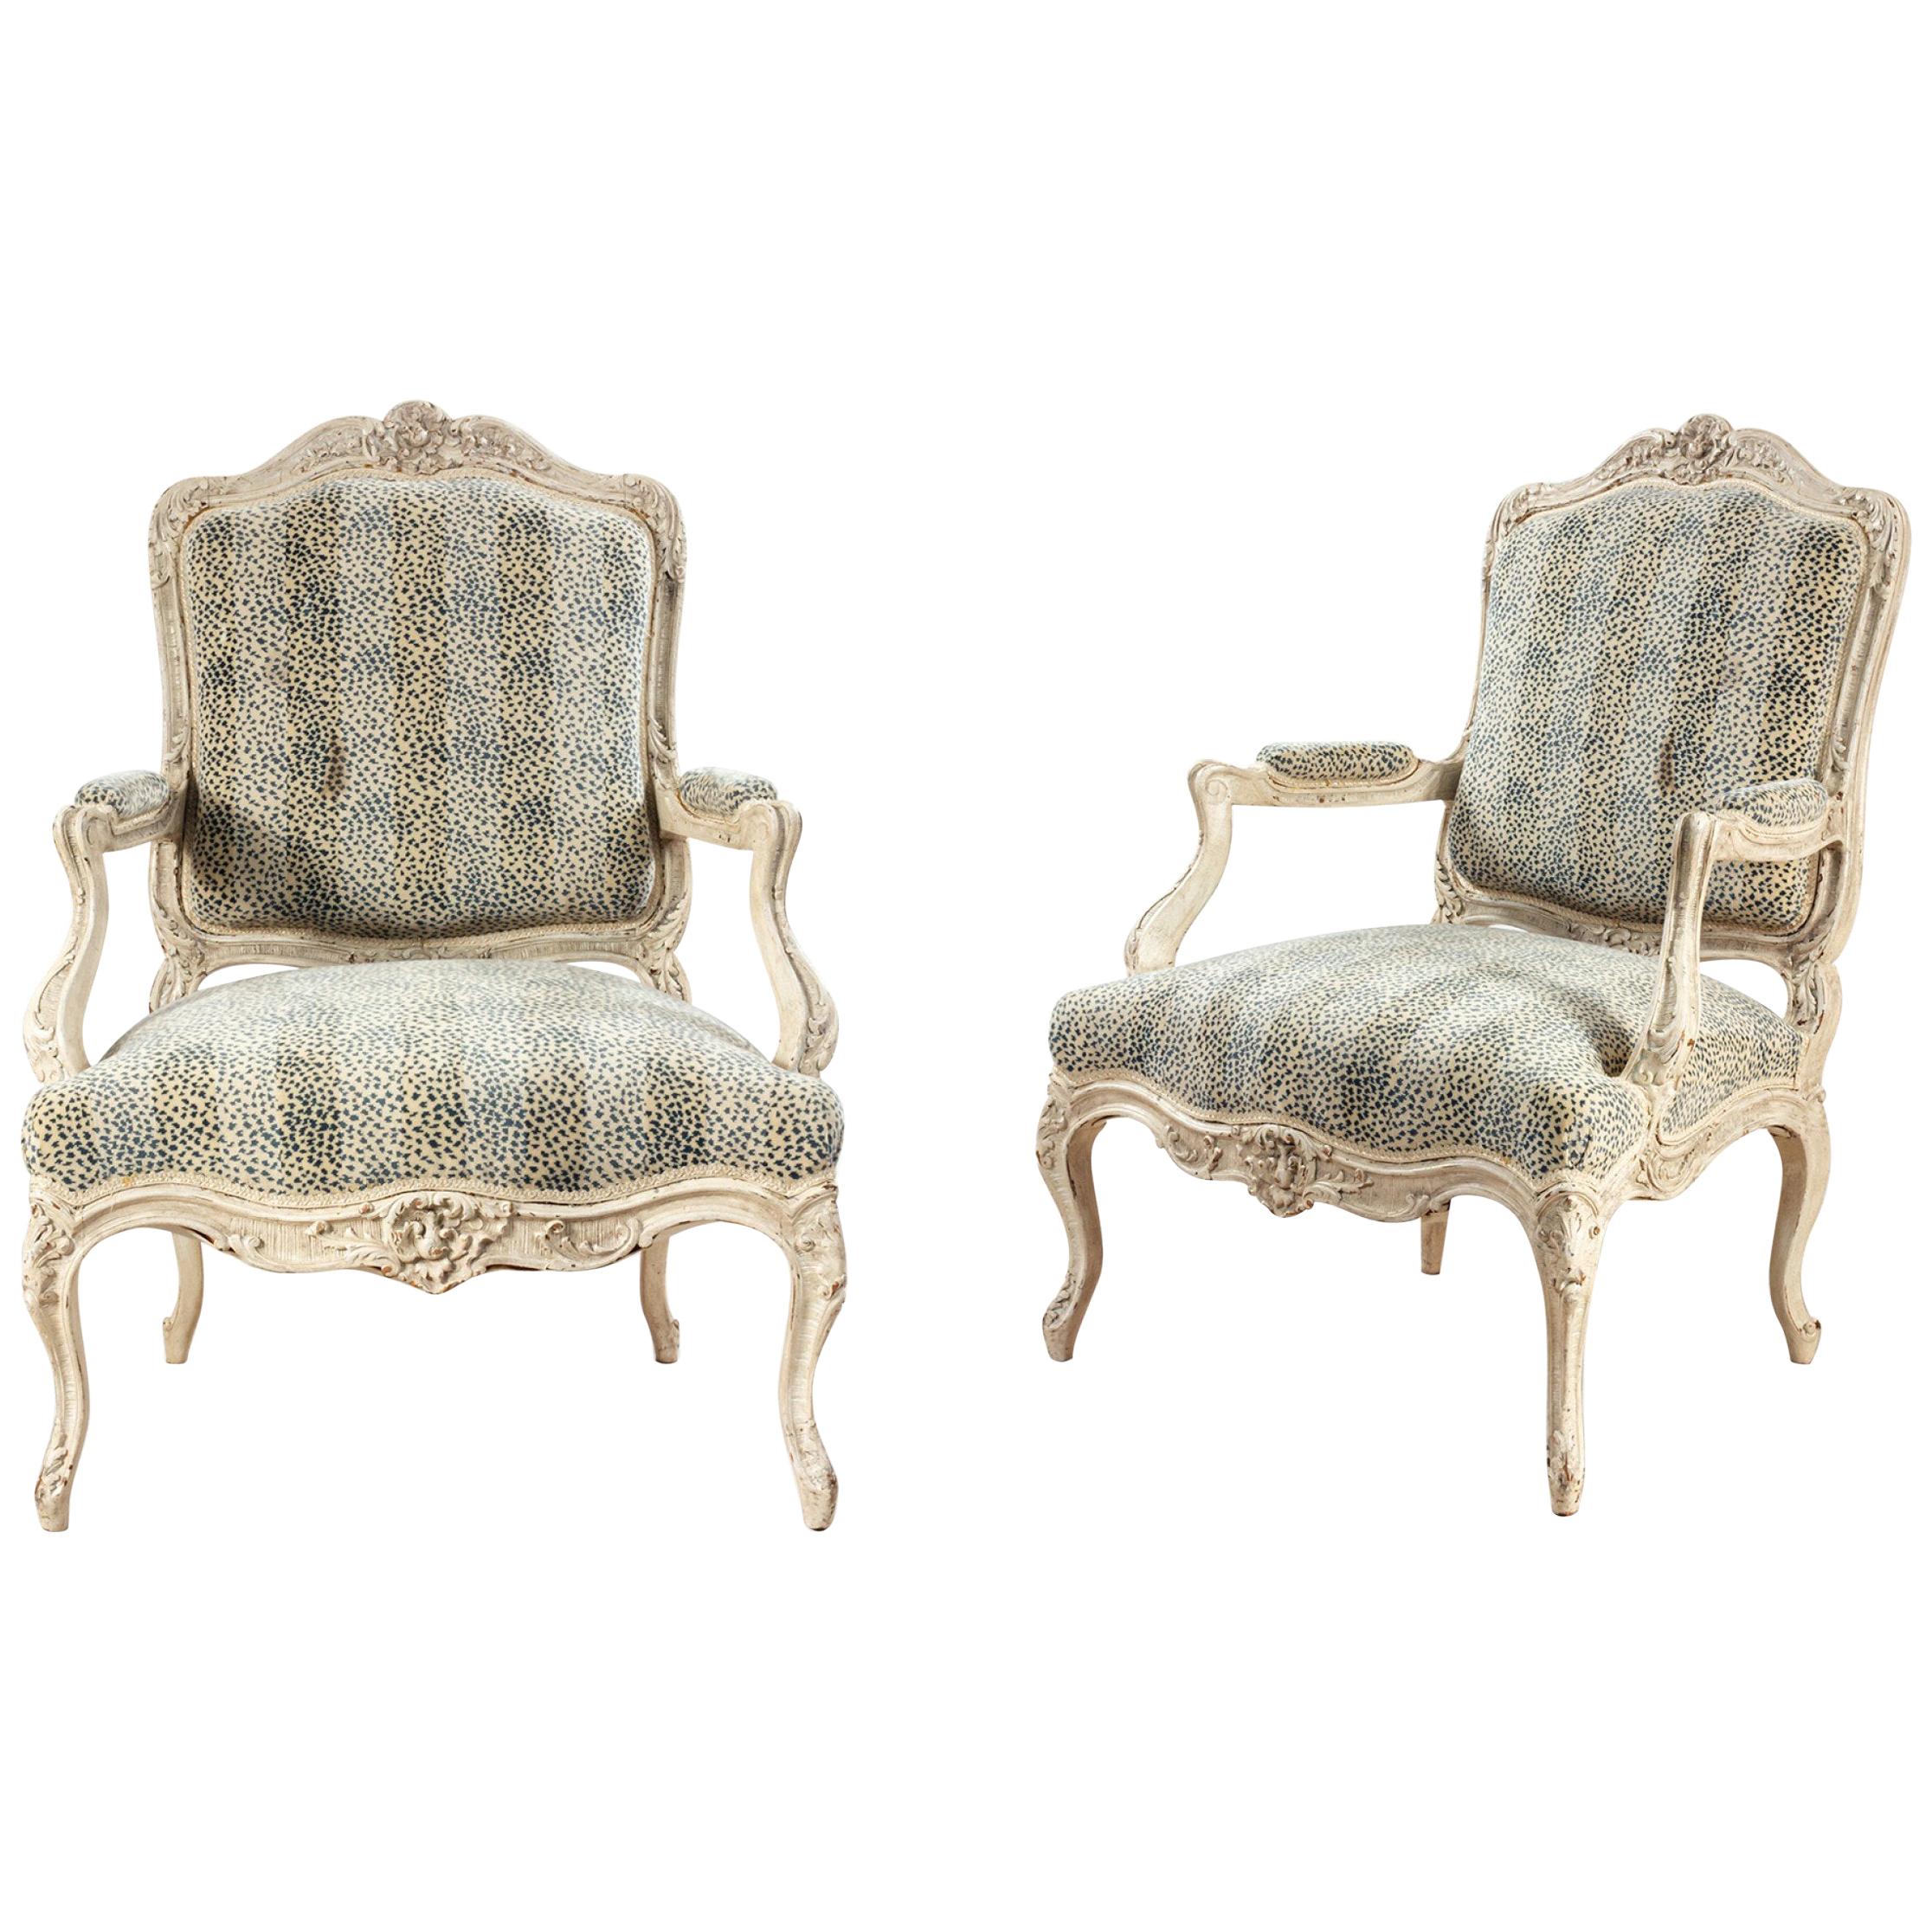 Pair of Cream Louis XV Style Carved Open Armchairs with Leopard Upholstery